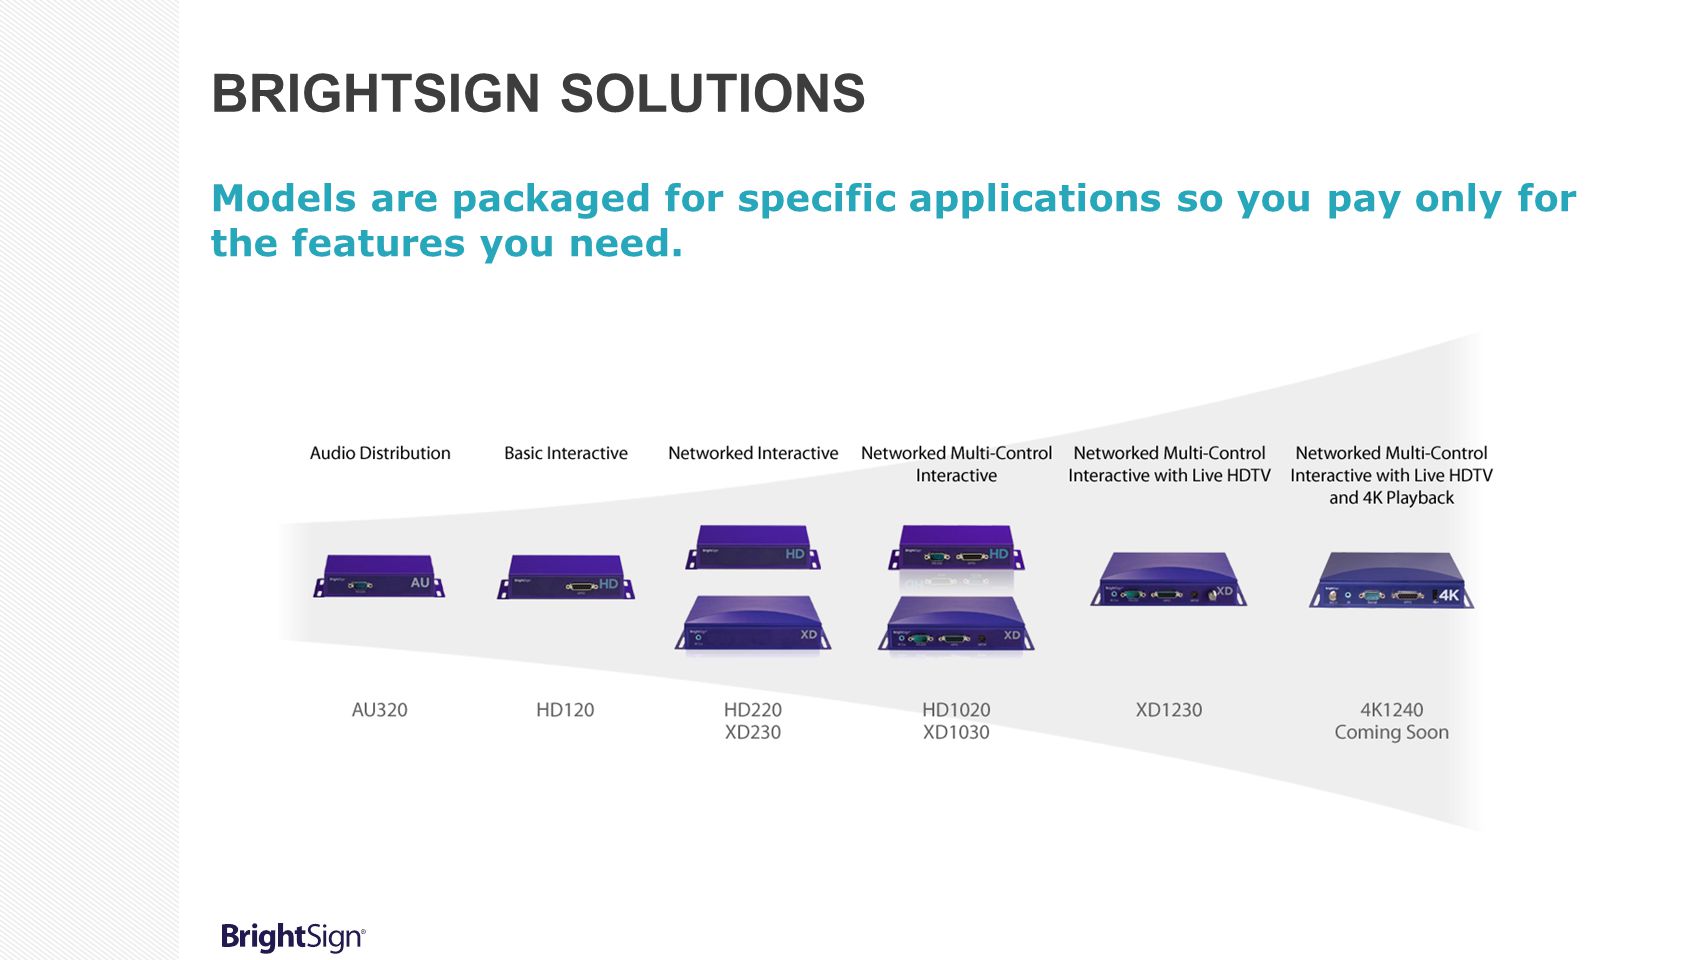 BrightSign solutions Models are packaged for specific applications so you pay only for the features you need.